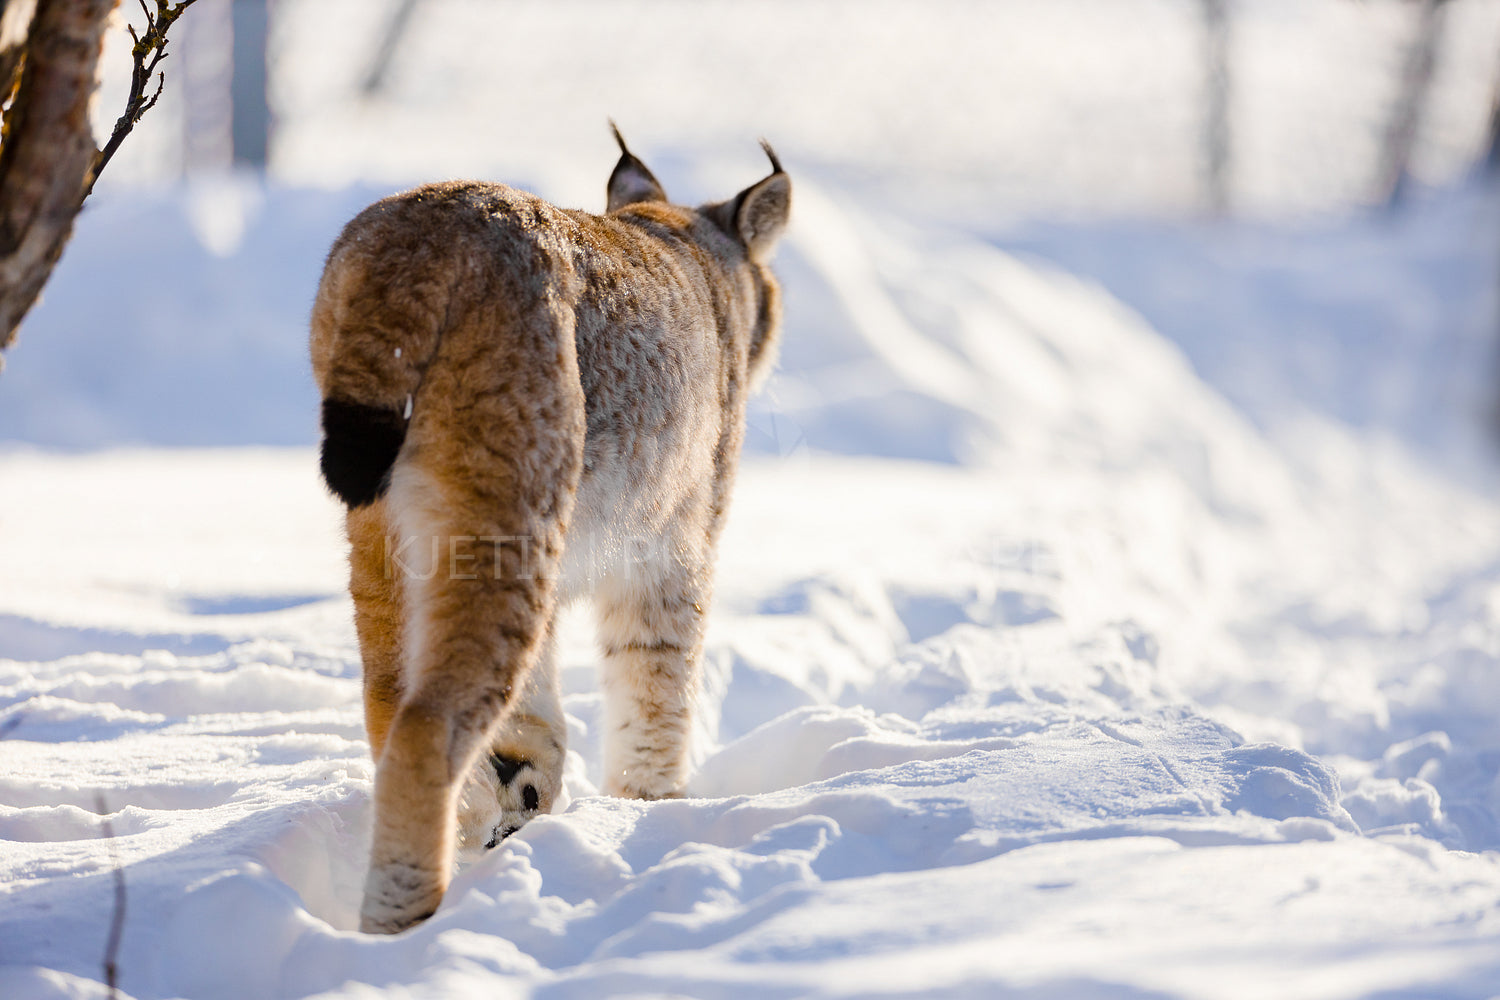 Rear view of lynx walking on snow in nature